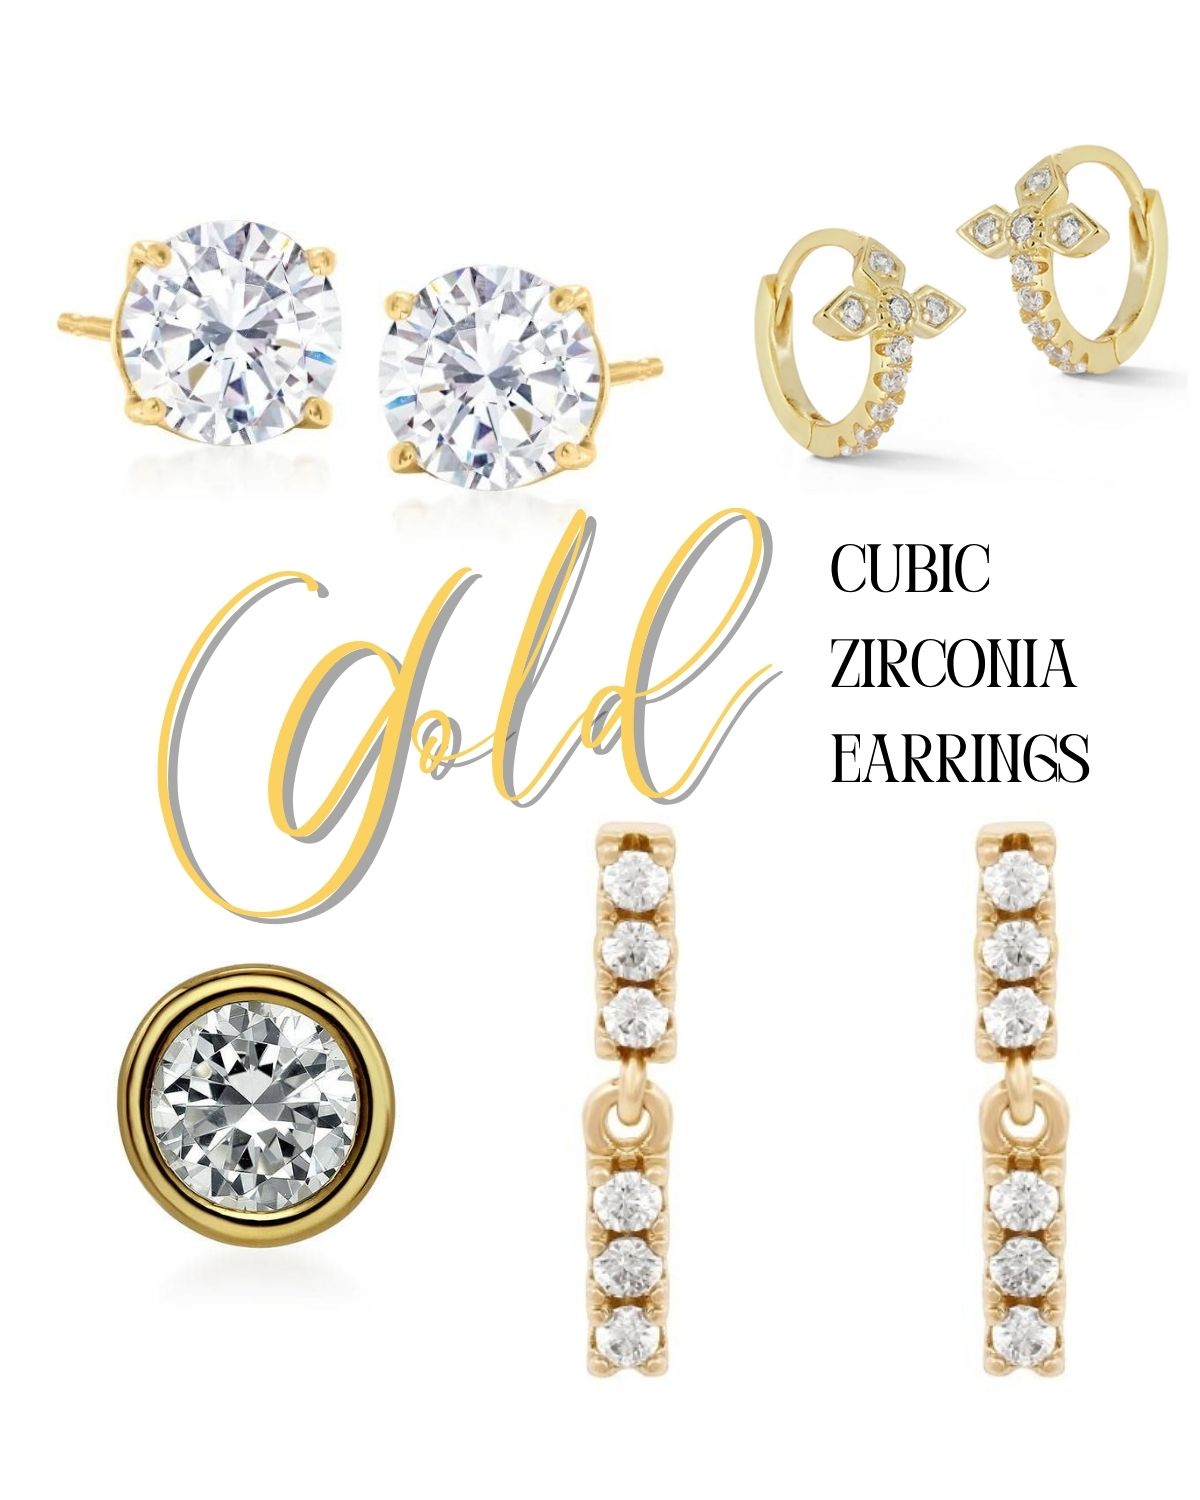 Four pairs of gold earrings with cubic zirconia